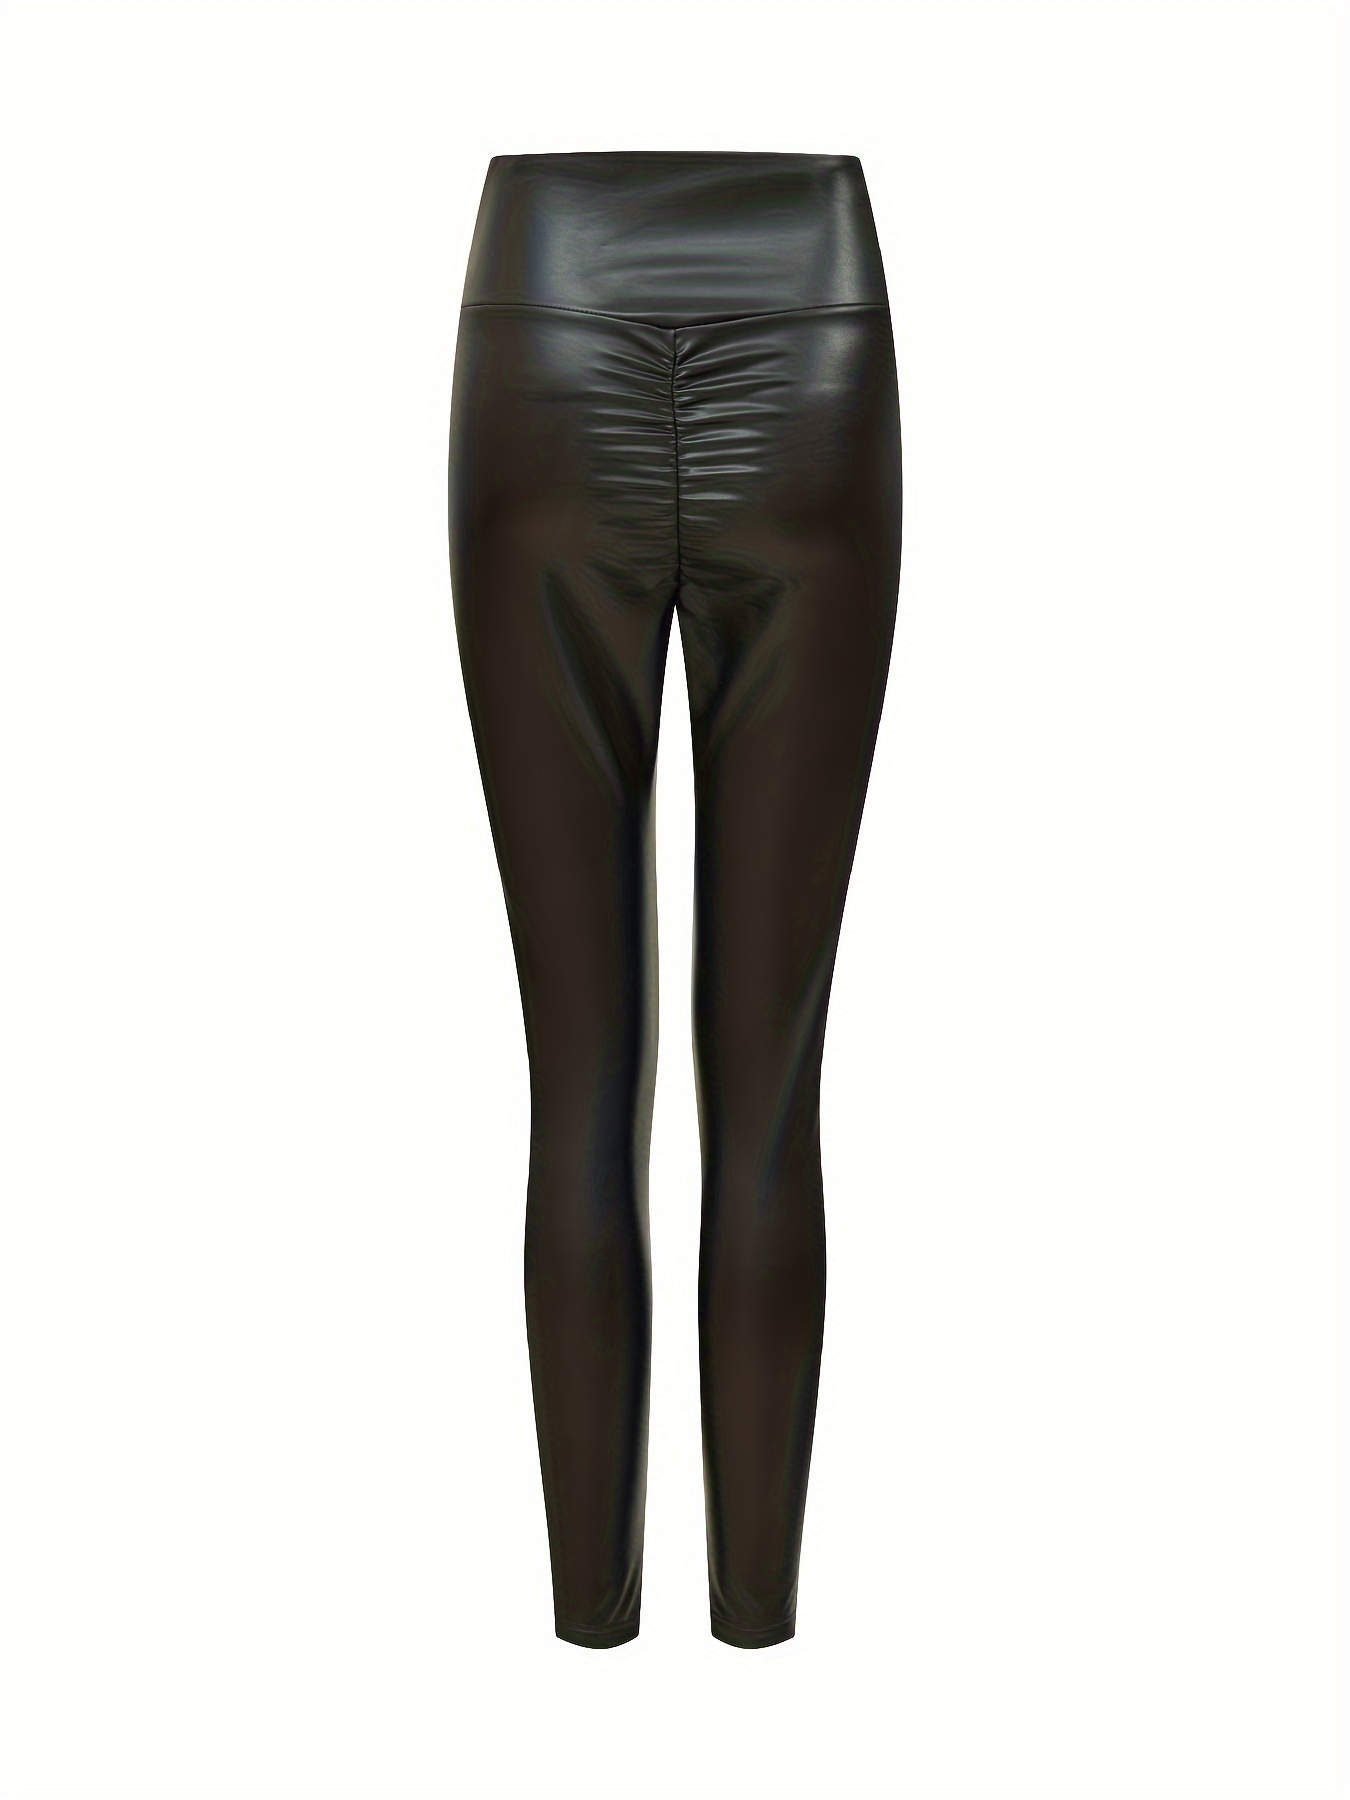 Women's Stretchy Faux Leather Leggings, High Waist Solid Color Pants, Butt  Lifting Trousers